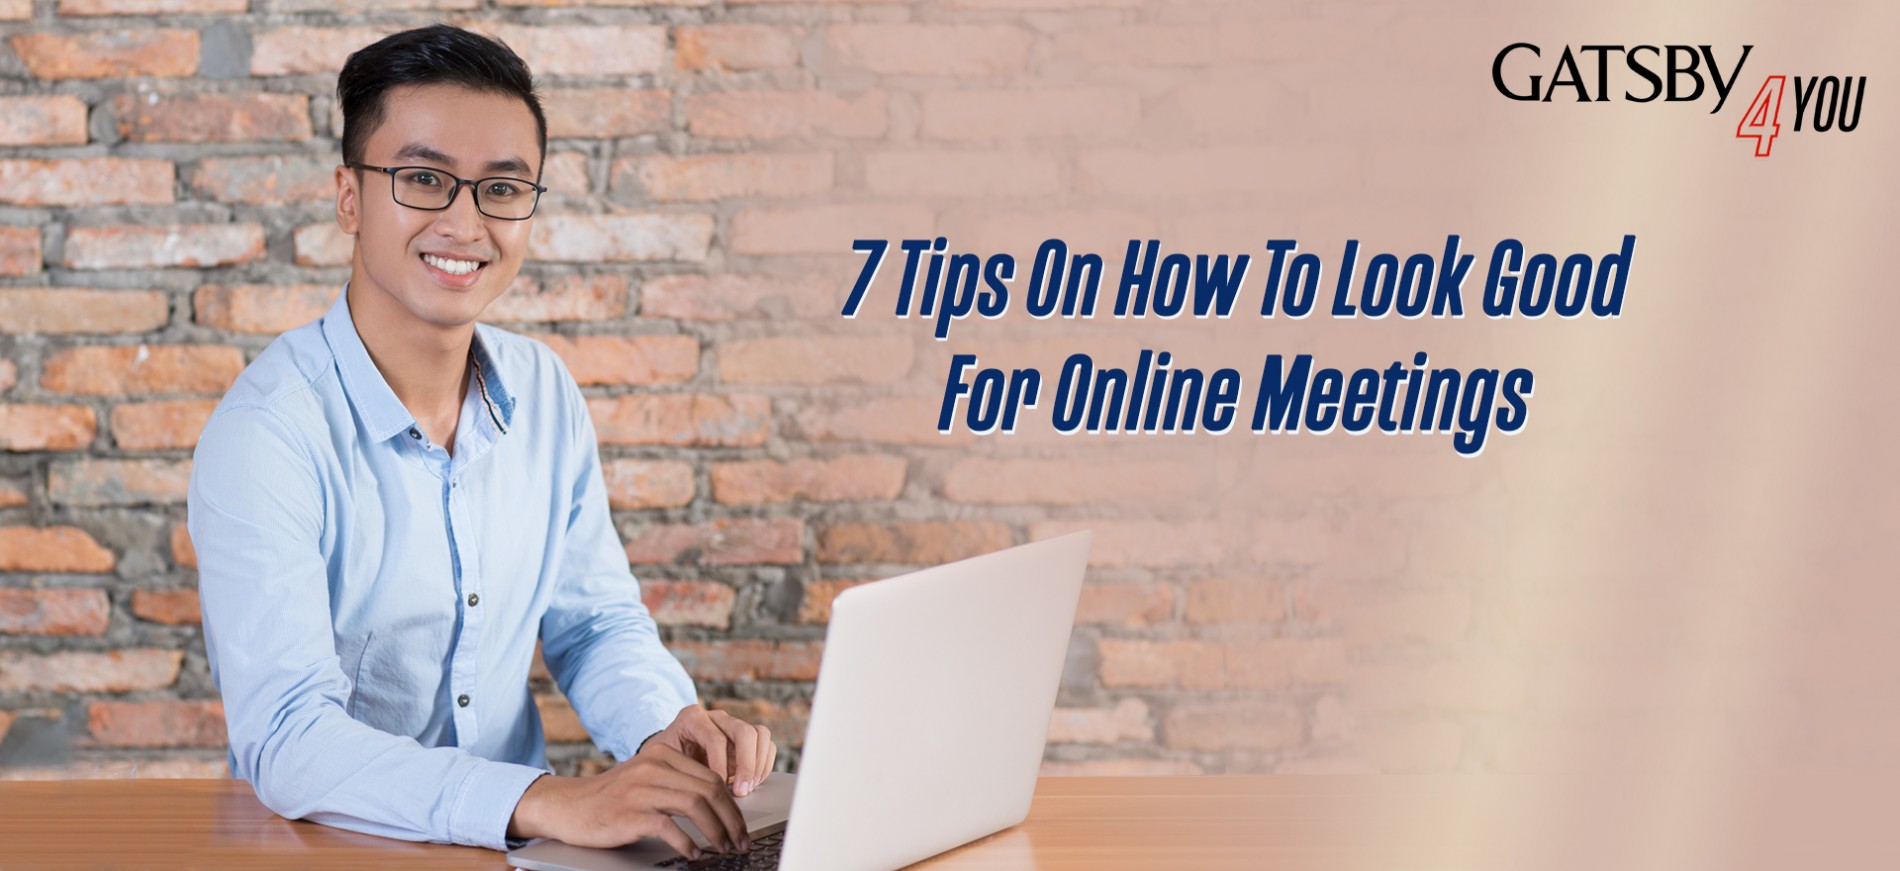 GATSBY Philippines 7 Tips on How to Look Good from for an Online Meeting_